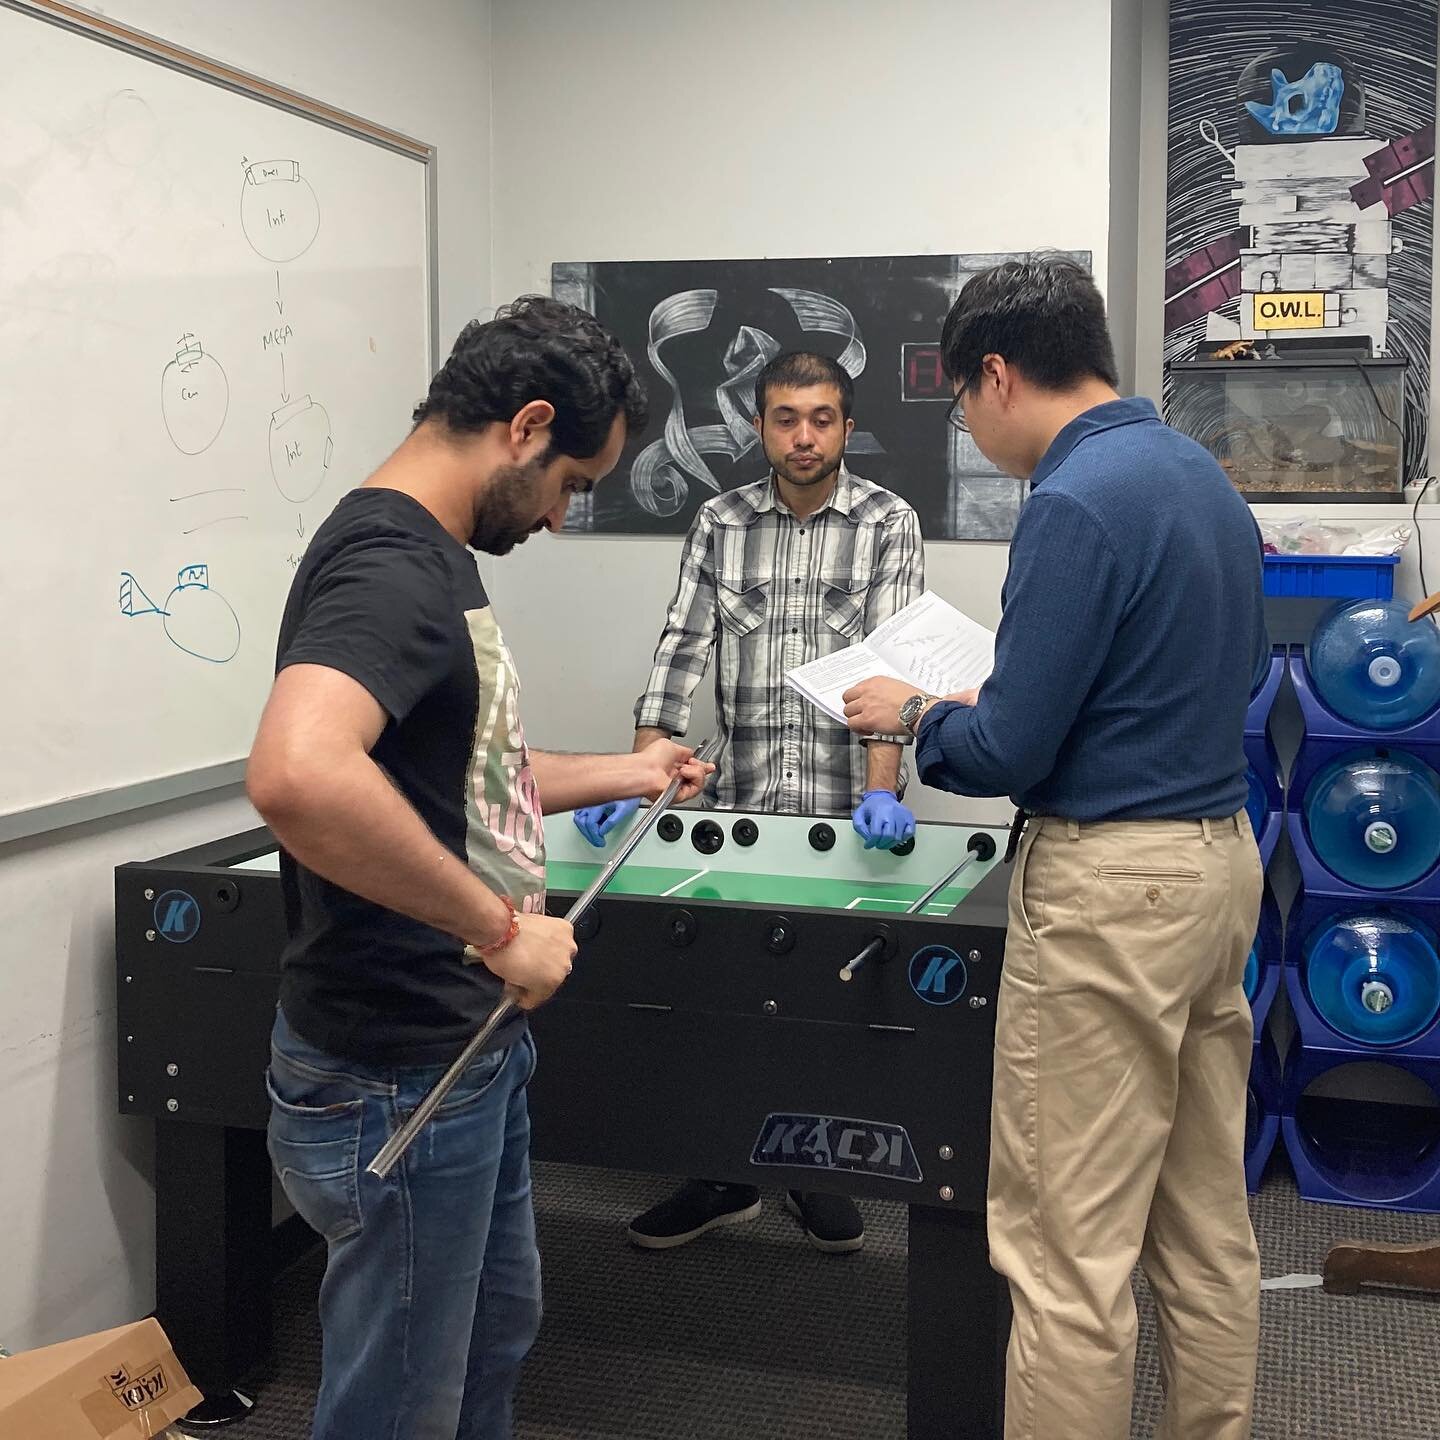 Today the Greene lab asks the important question: how many PhD&rsquo;s does it take to assemble a foosball table?